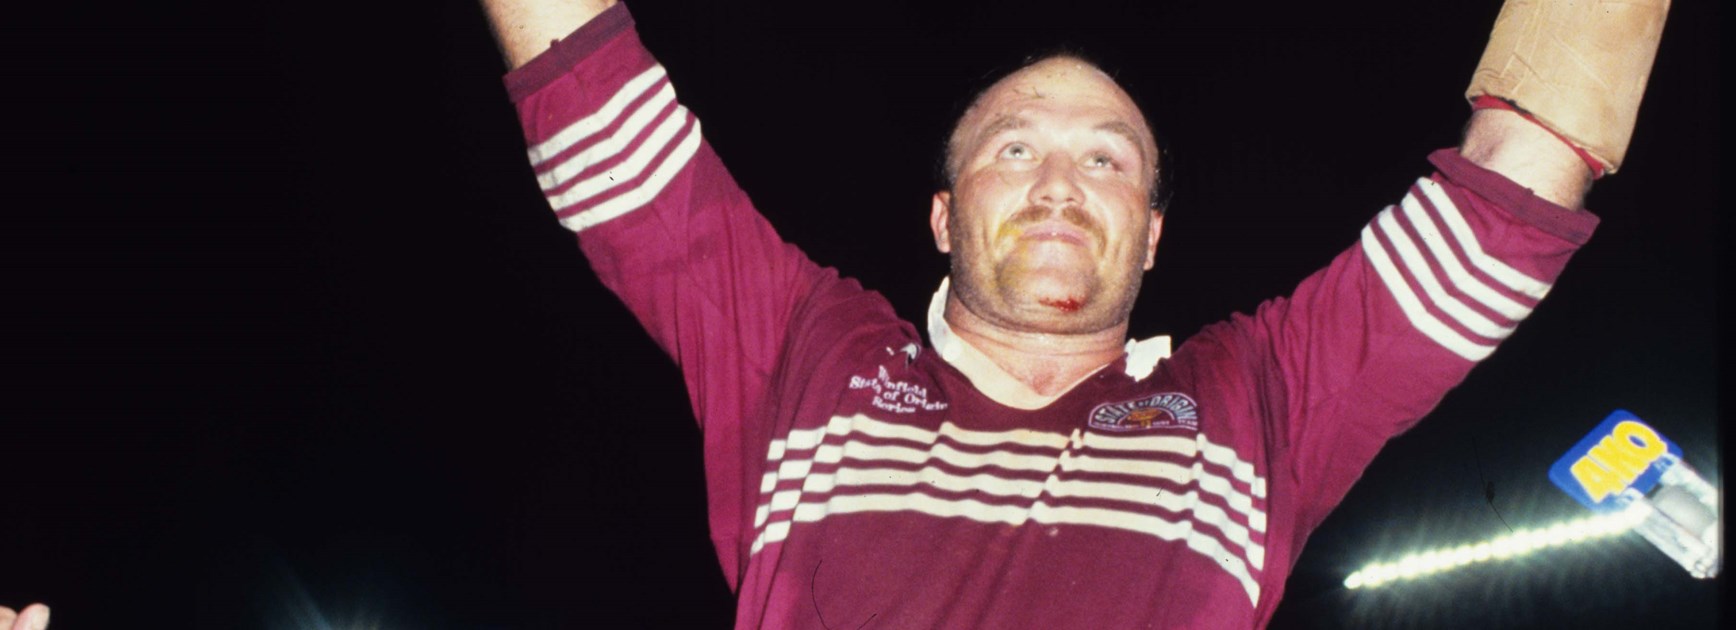 Maroons legend Wally Lewis after winning the 1991 series.